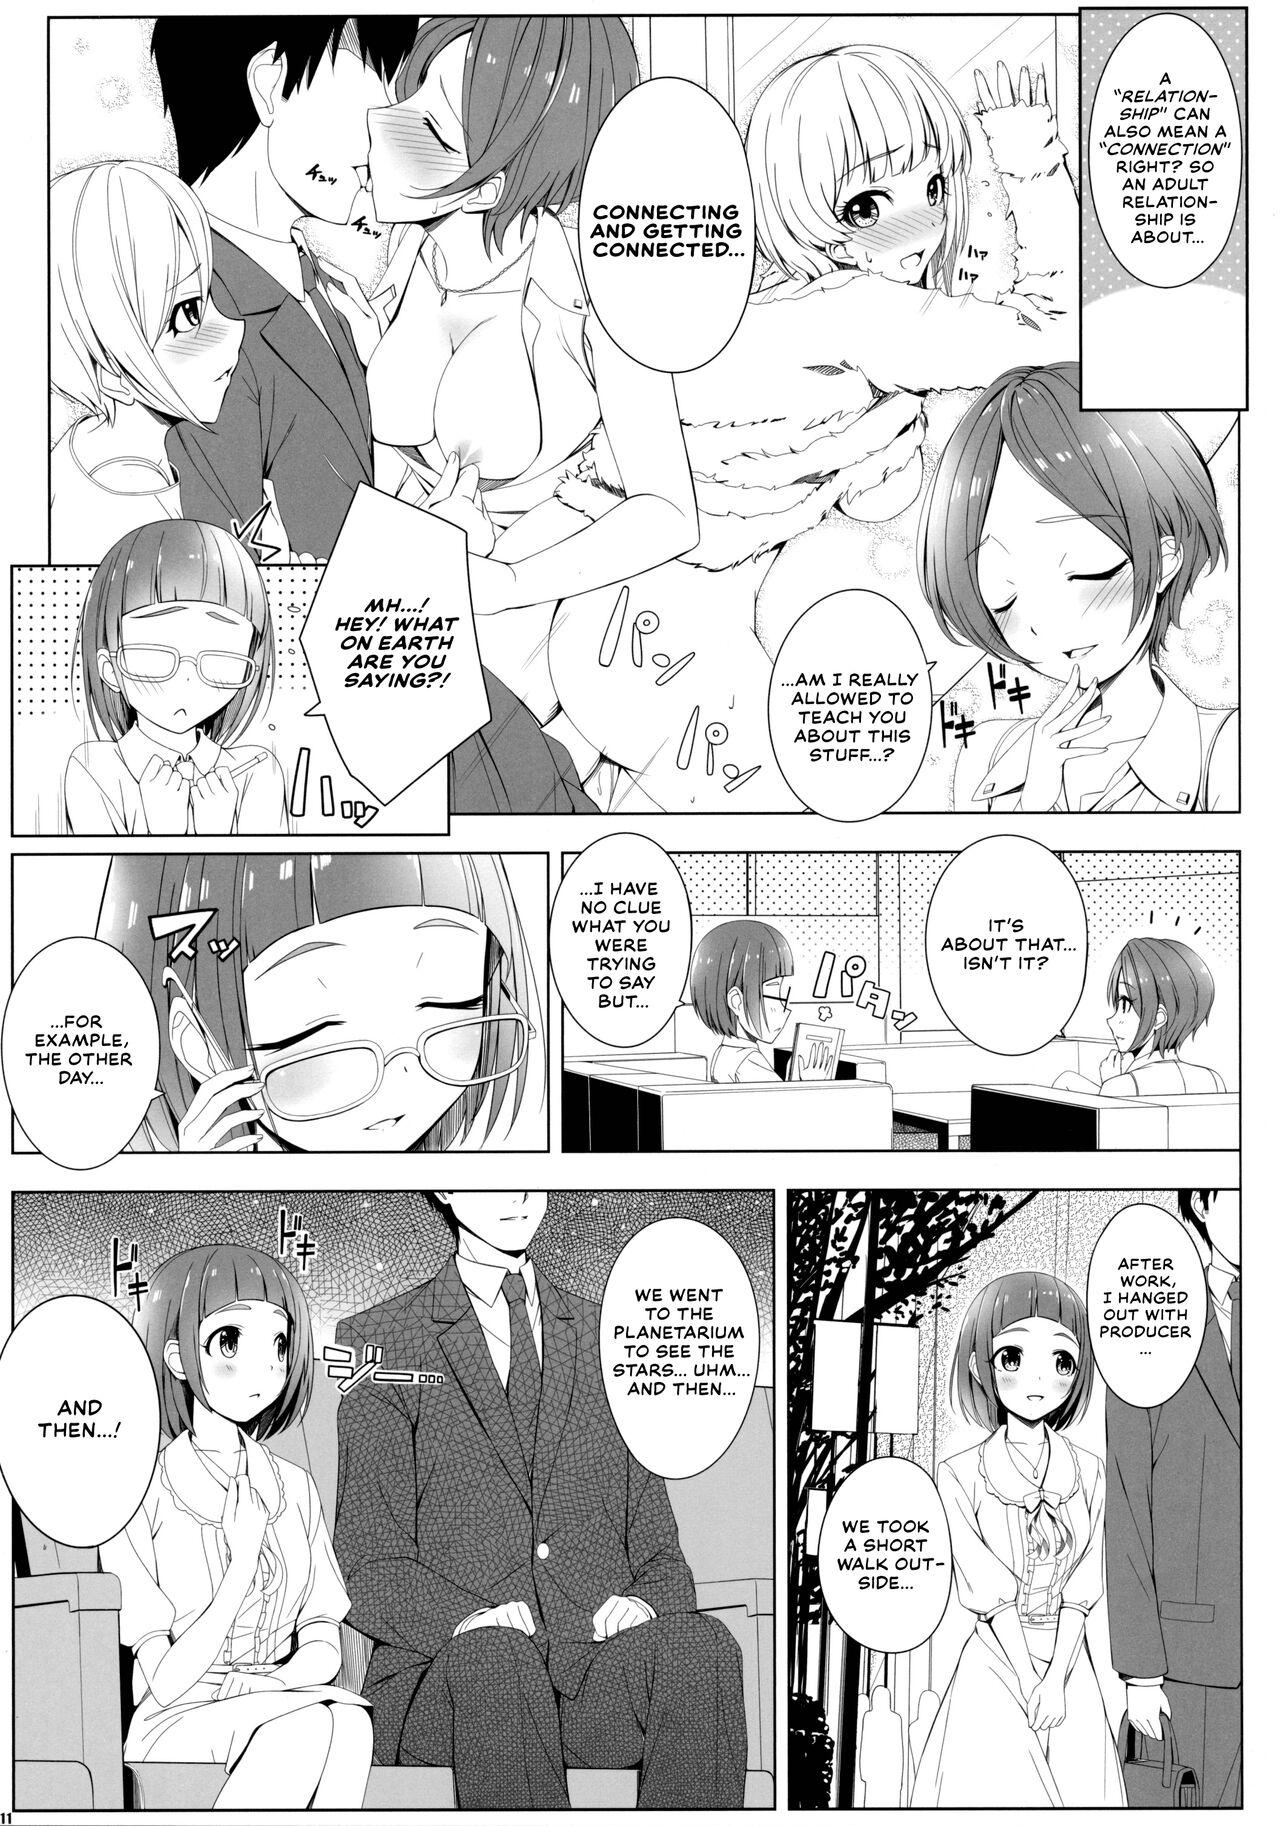 Tributo SESSION - The idolmaster Calle - Page 10